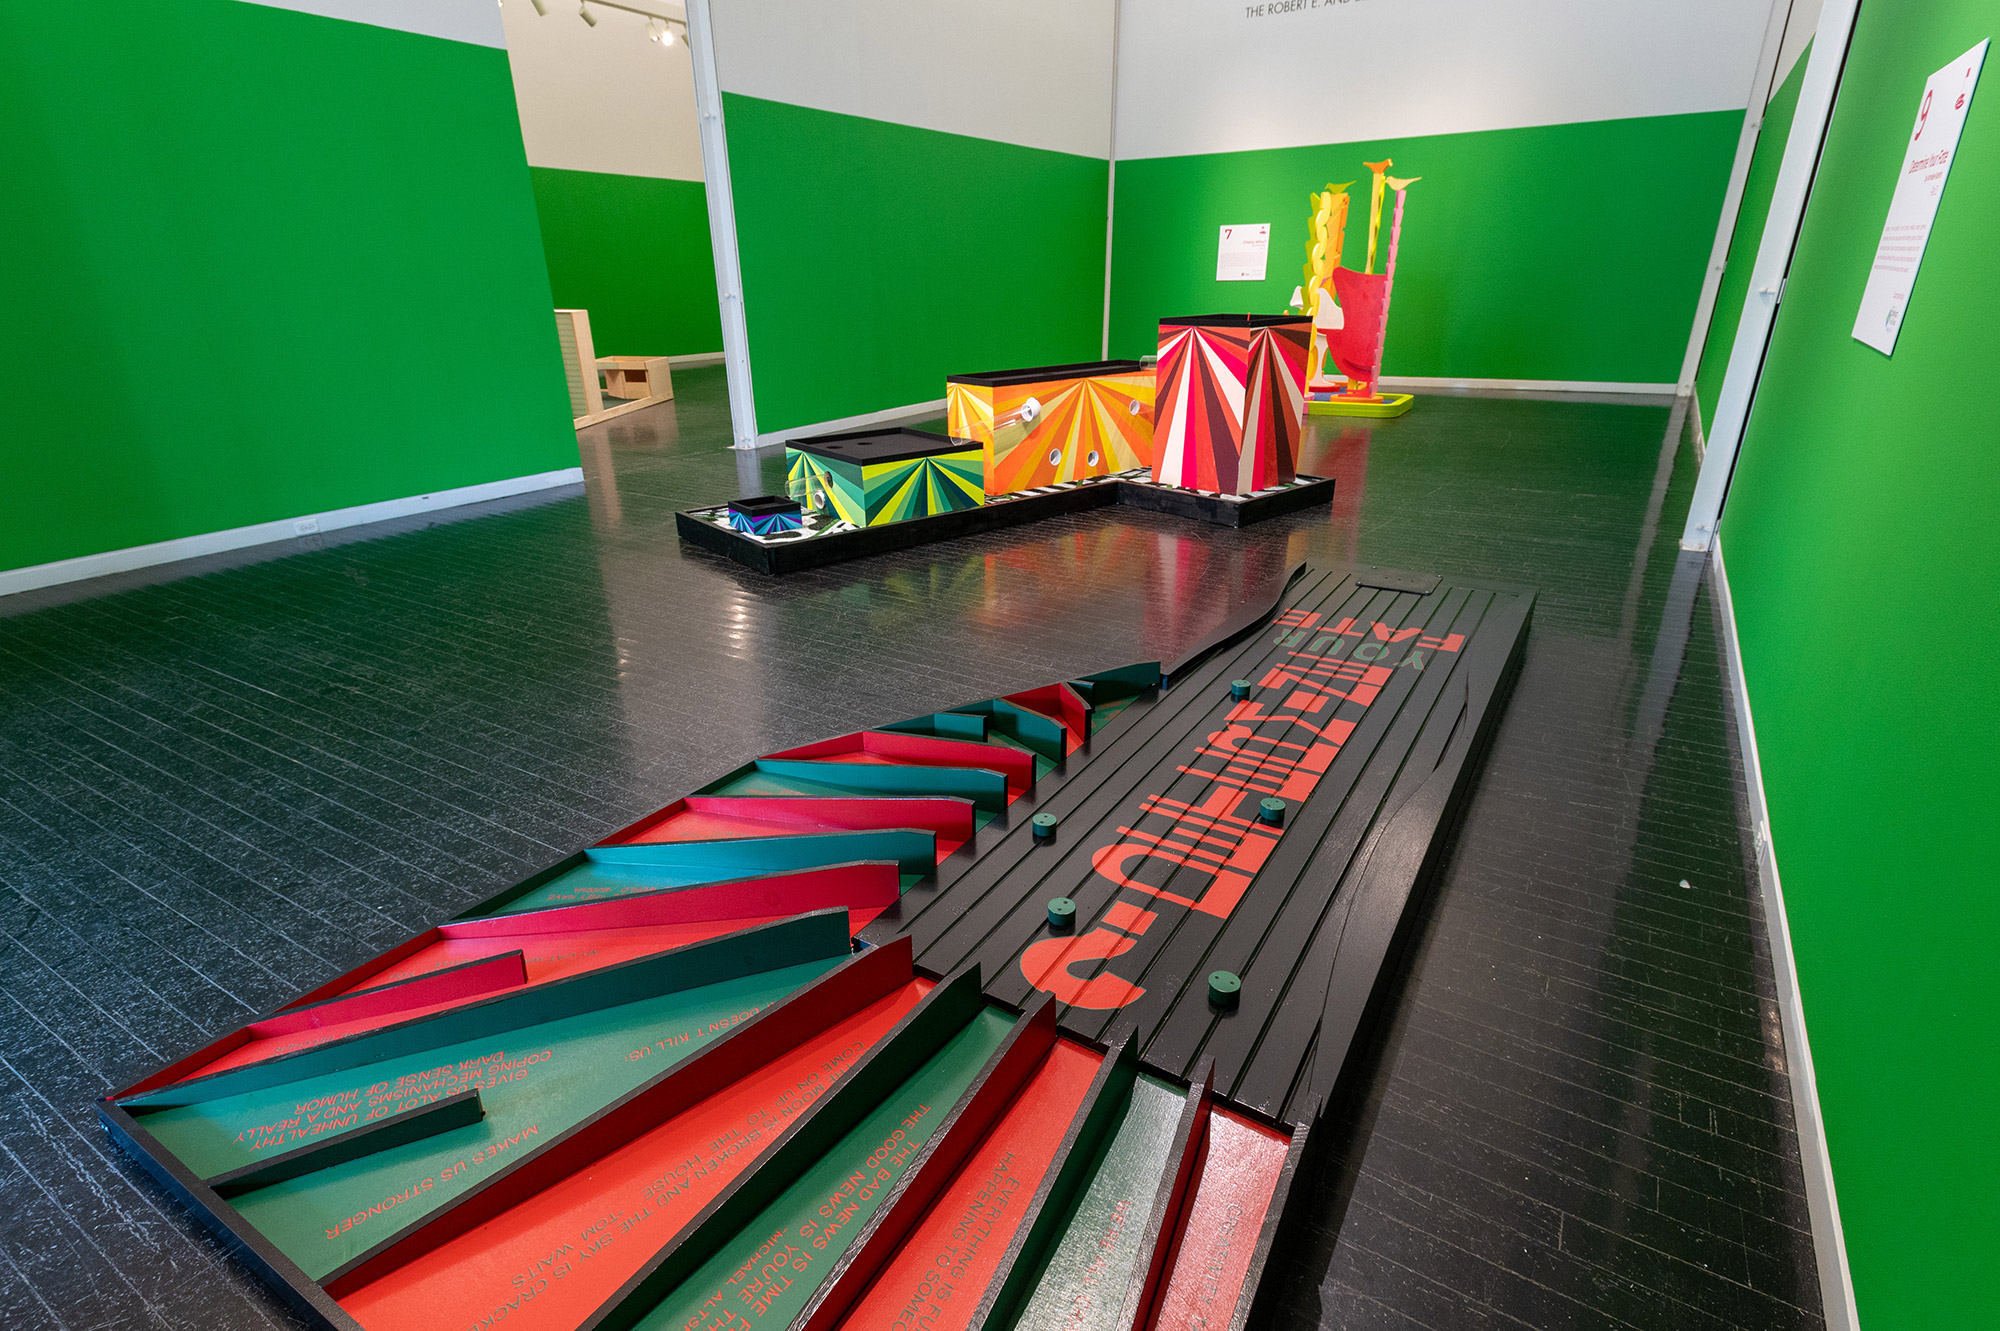 Take a Swing Around ‘Par Excellence Redux,’ a Mini Golf Course of Playable Artworks at Elmhurst Art Museum